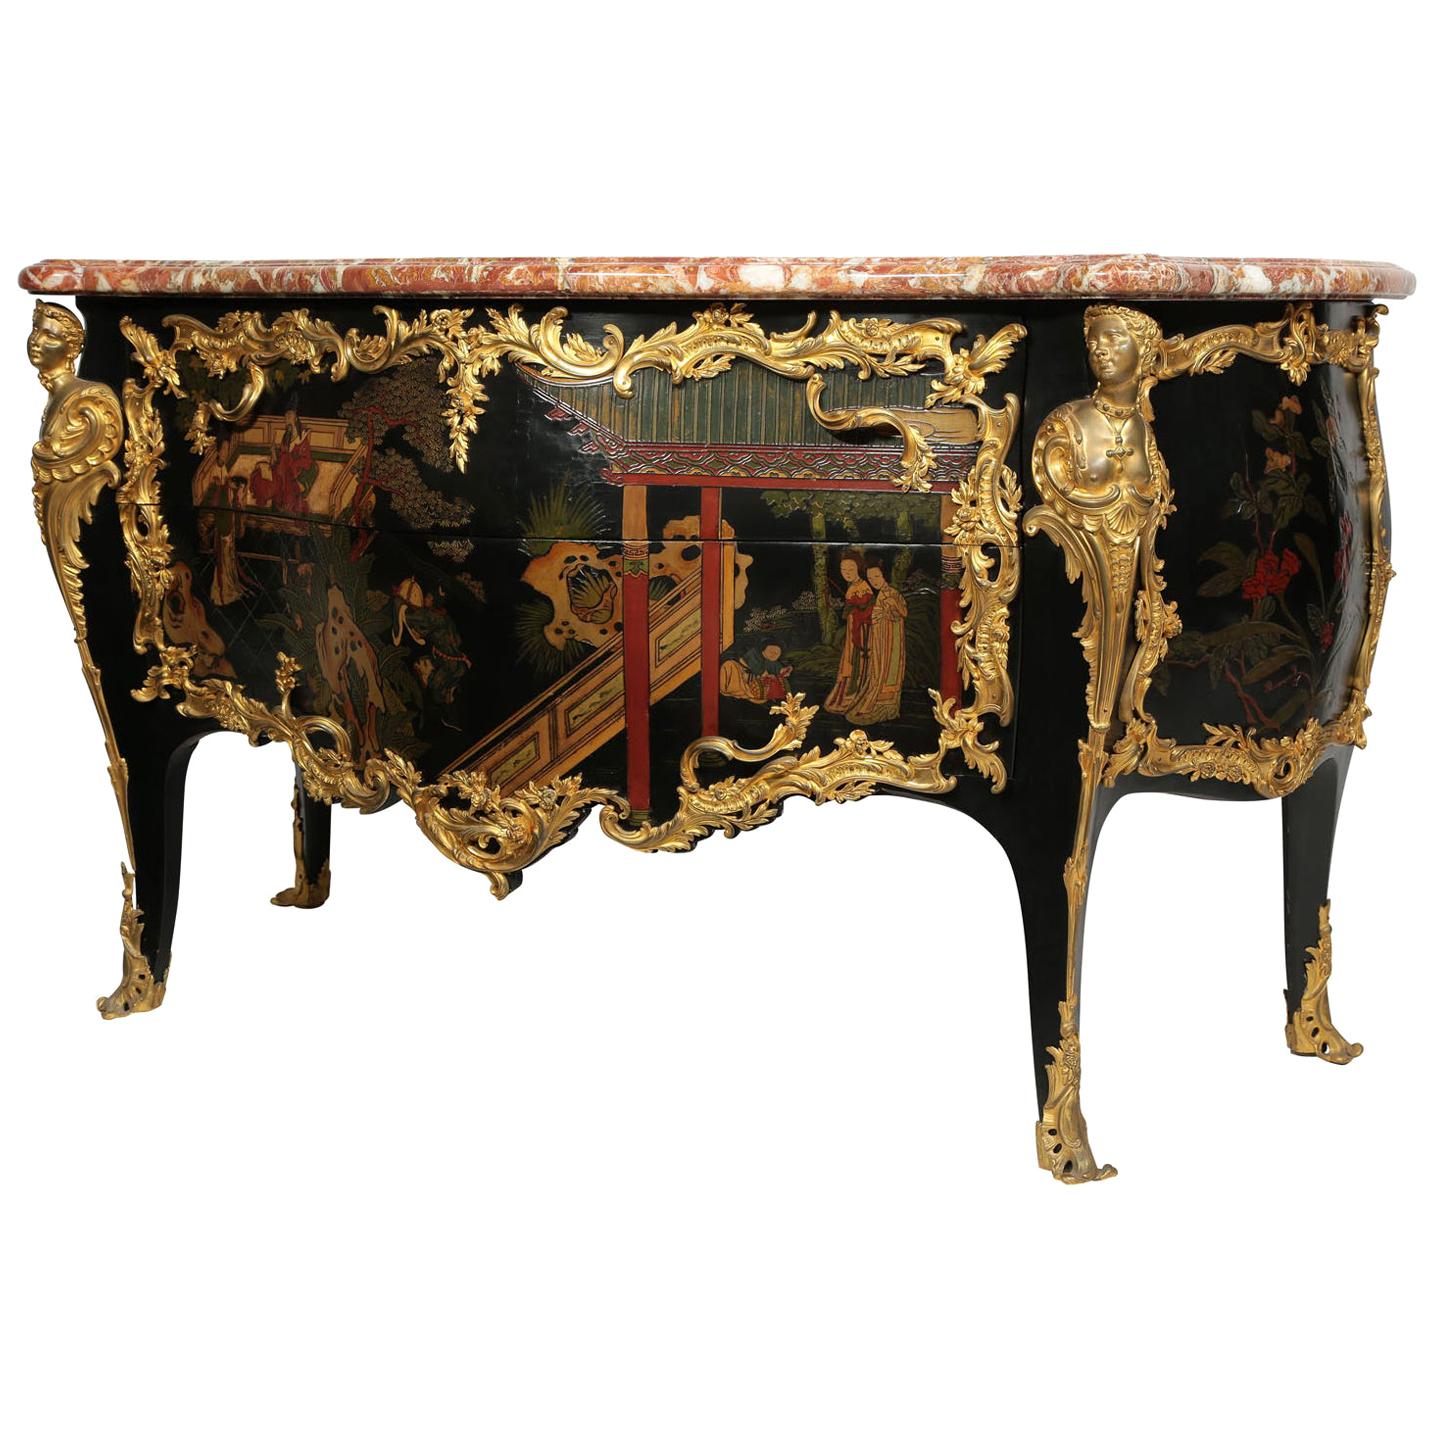 Palatial Louis XV Style 19th Century Gilt Bronze-Mounted Chinoiserie Commode